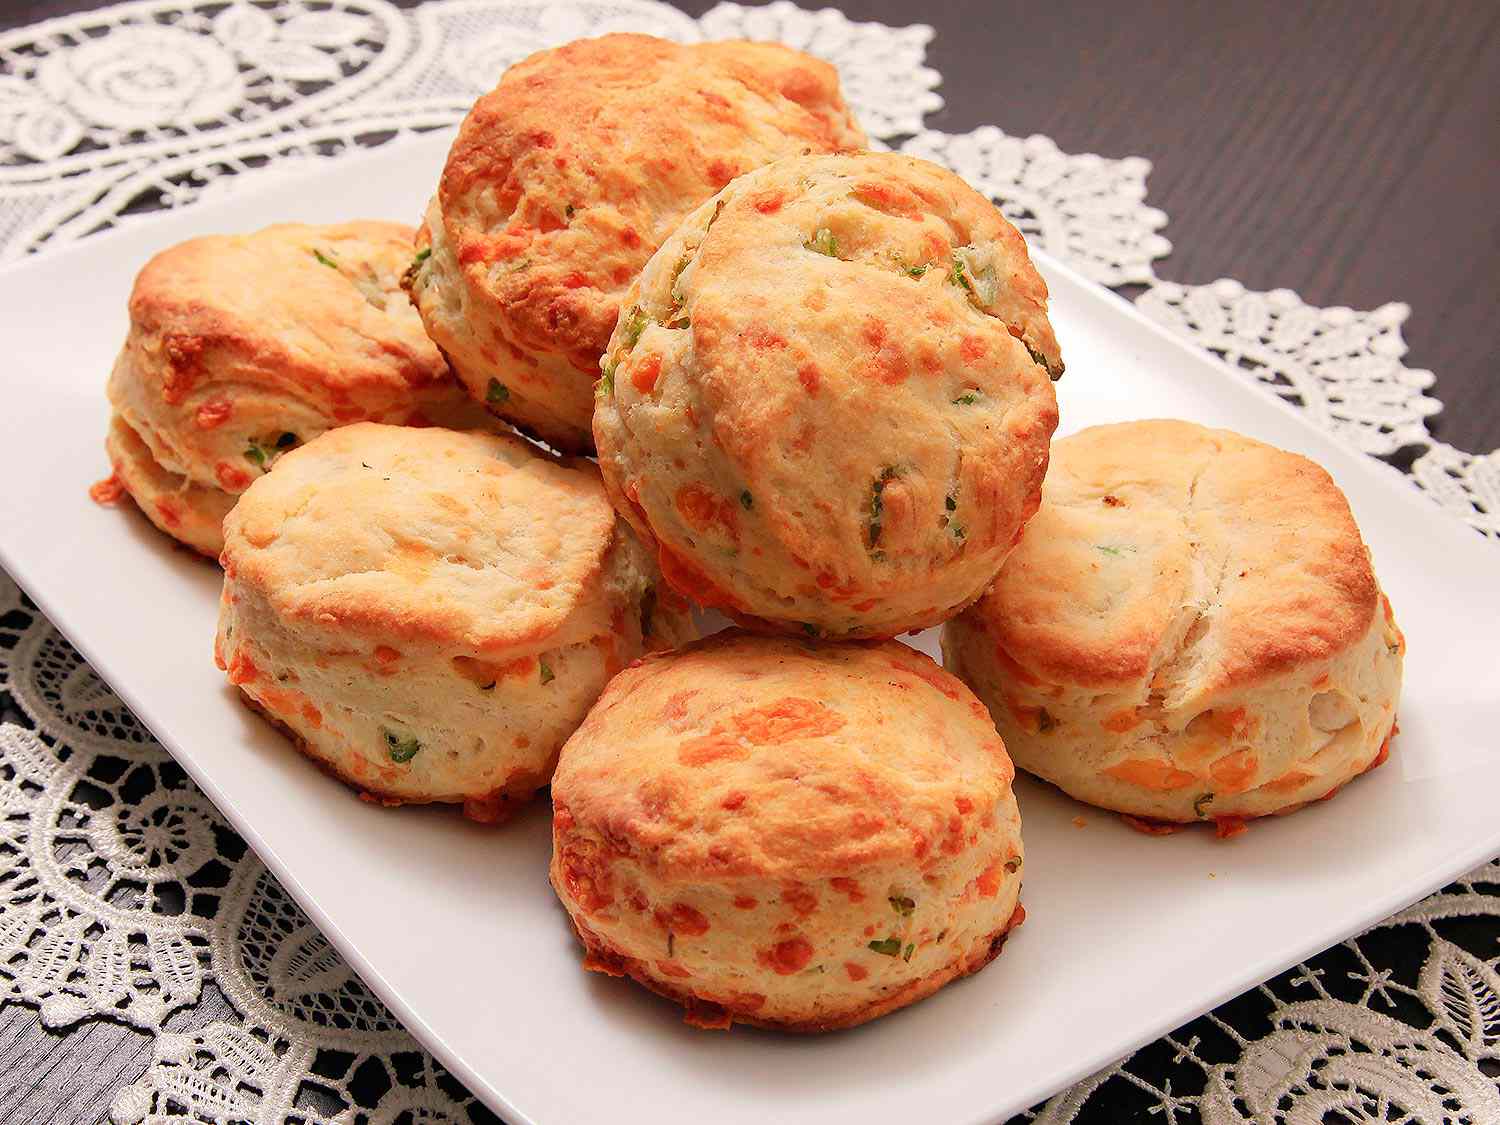 A cheddar cheese and scallion version of extra-flaky buttermilk biscuits.